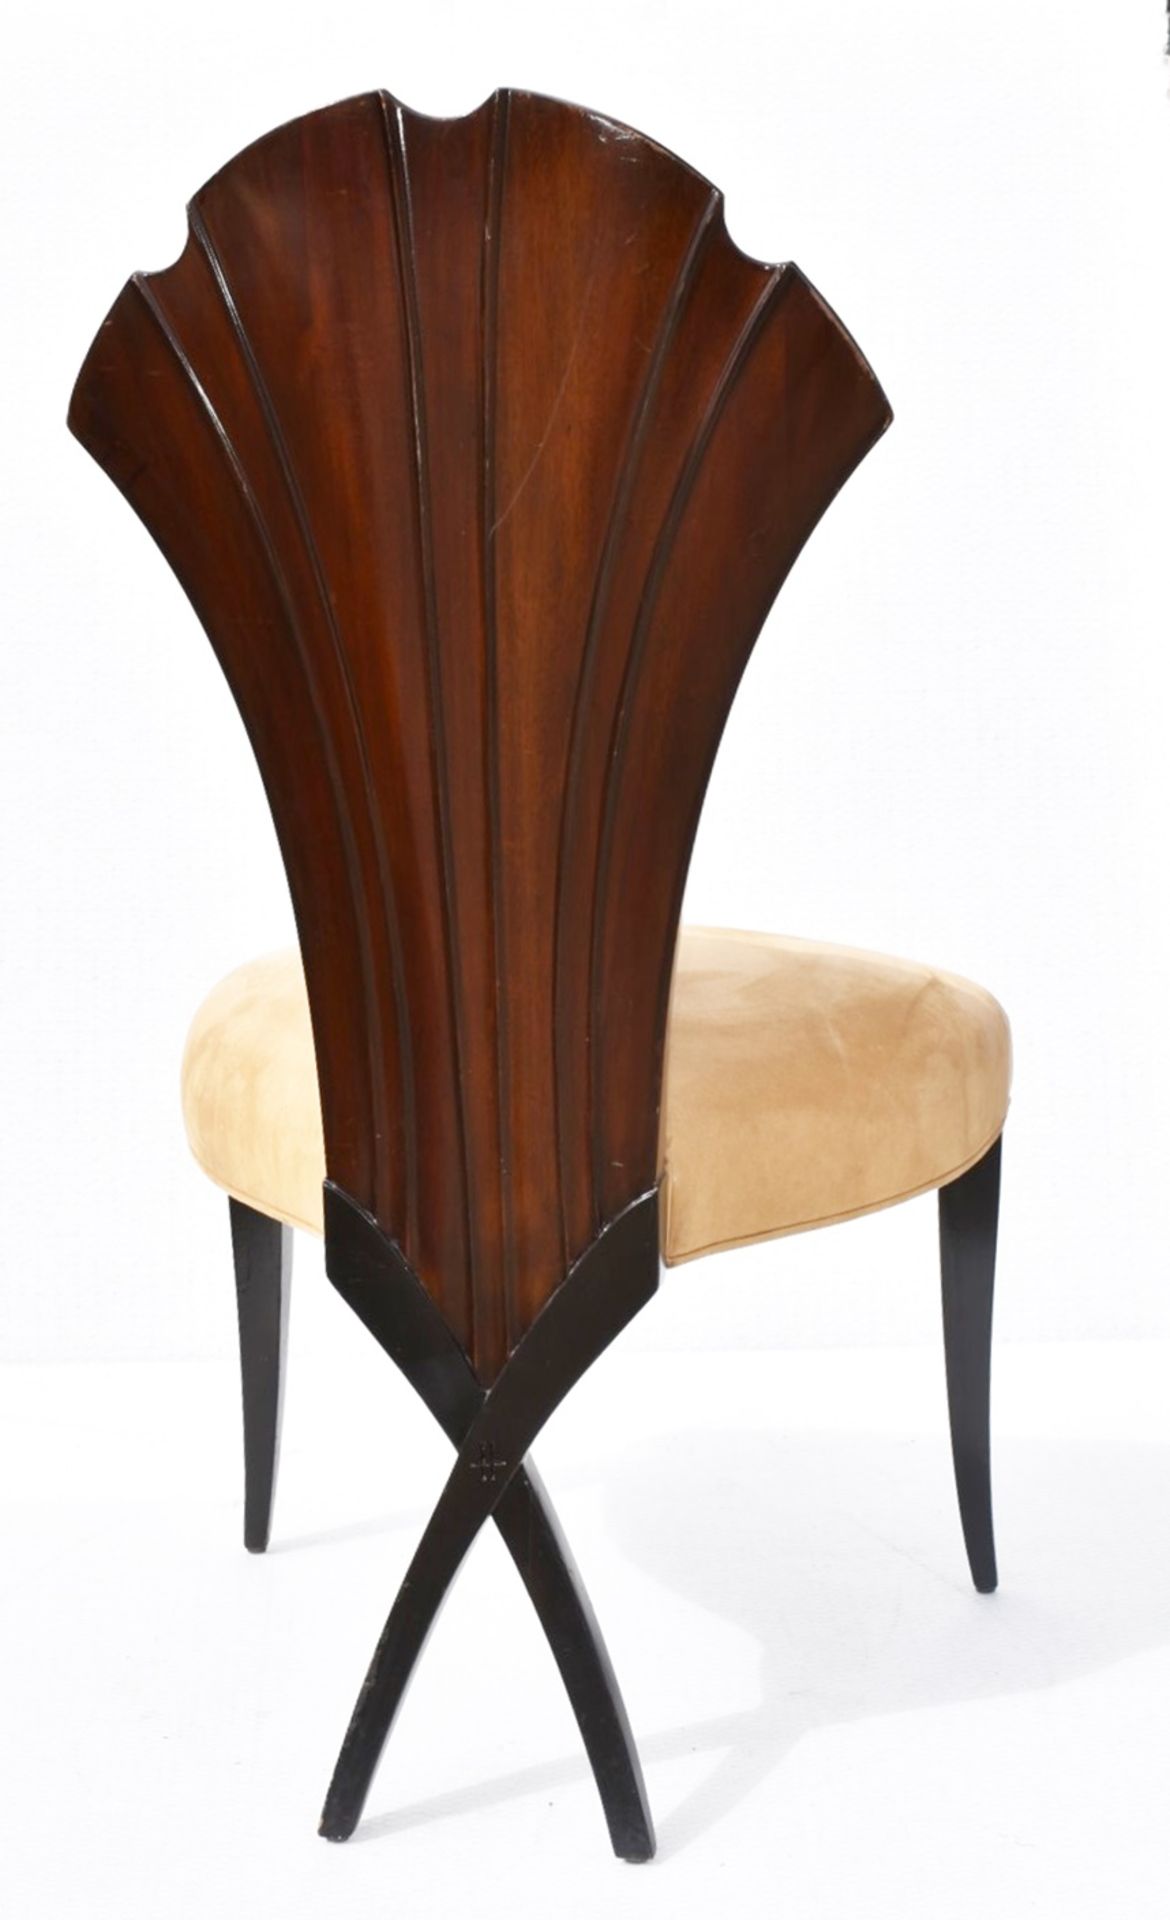 4 x CHRISTOPHER GUY 'La Croisette' Luxury Hand-carved Solid Mahogany Designer Dining Chairs - - Bild 5 aus 11